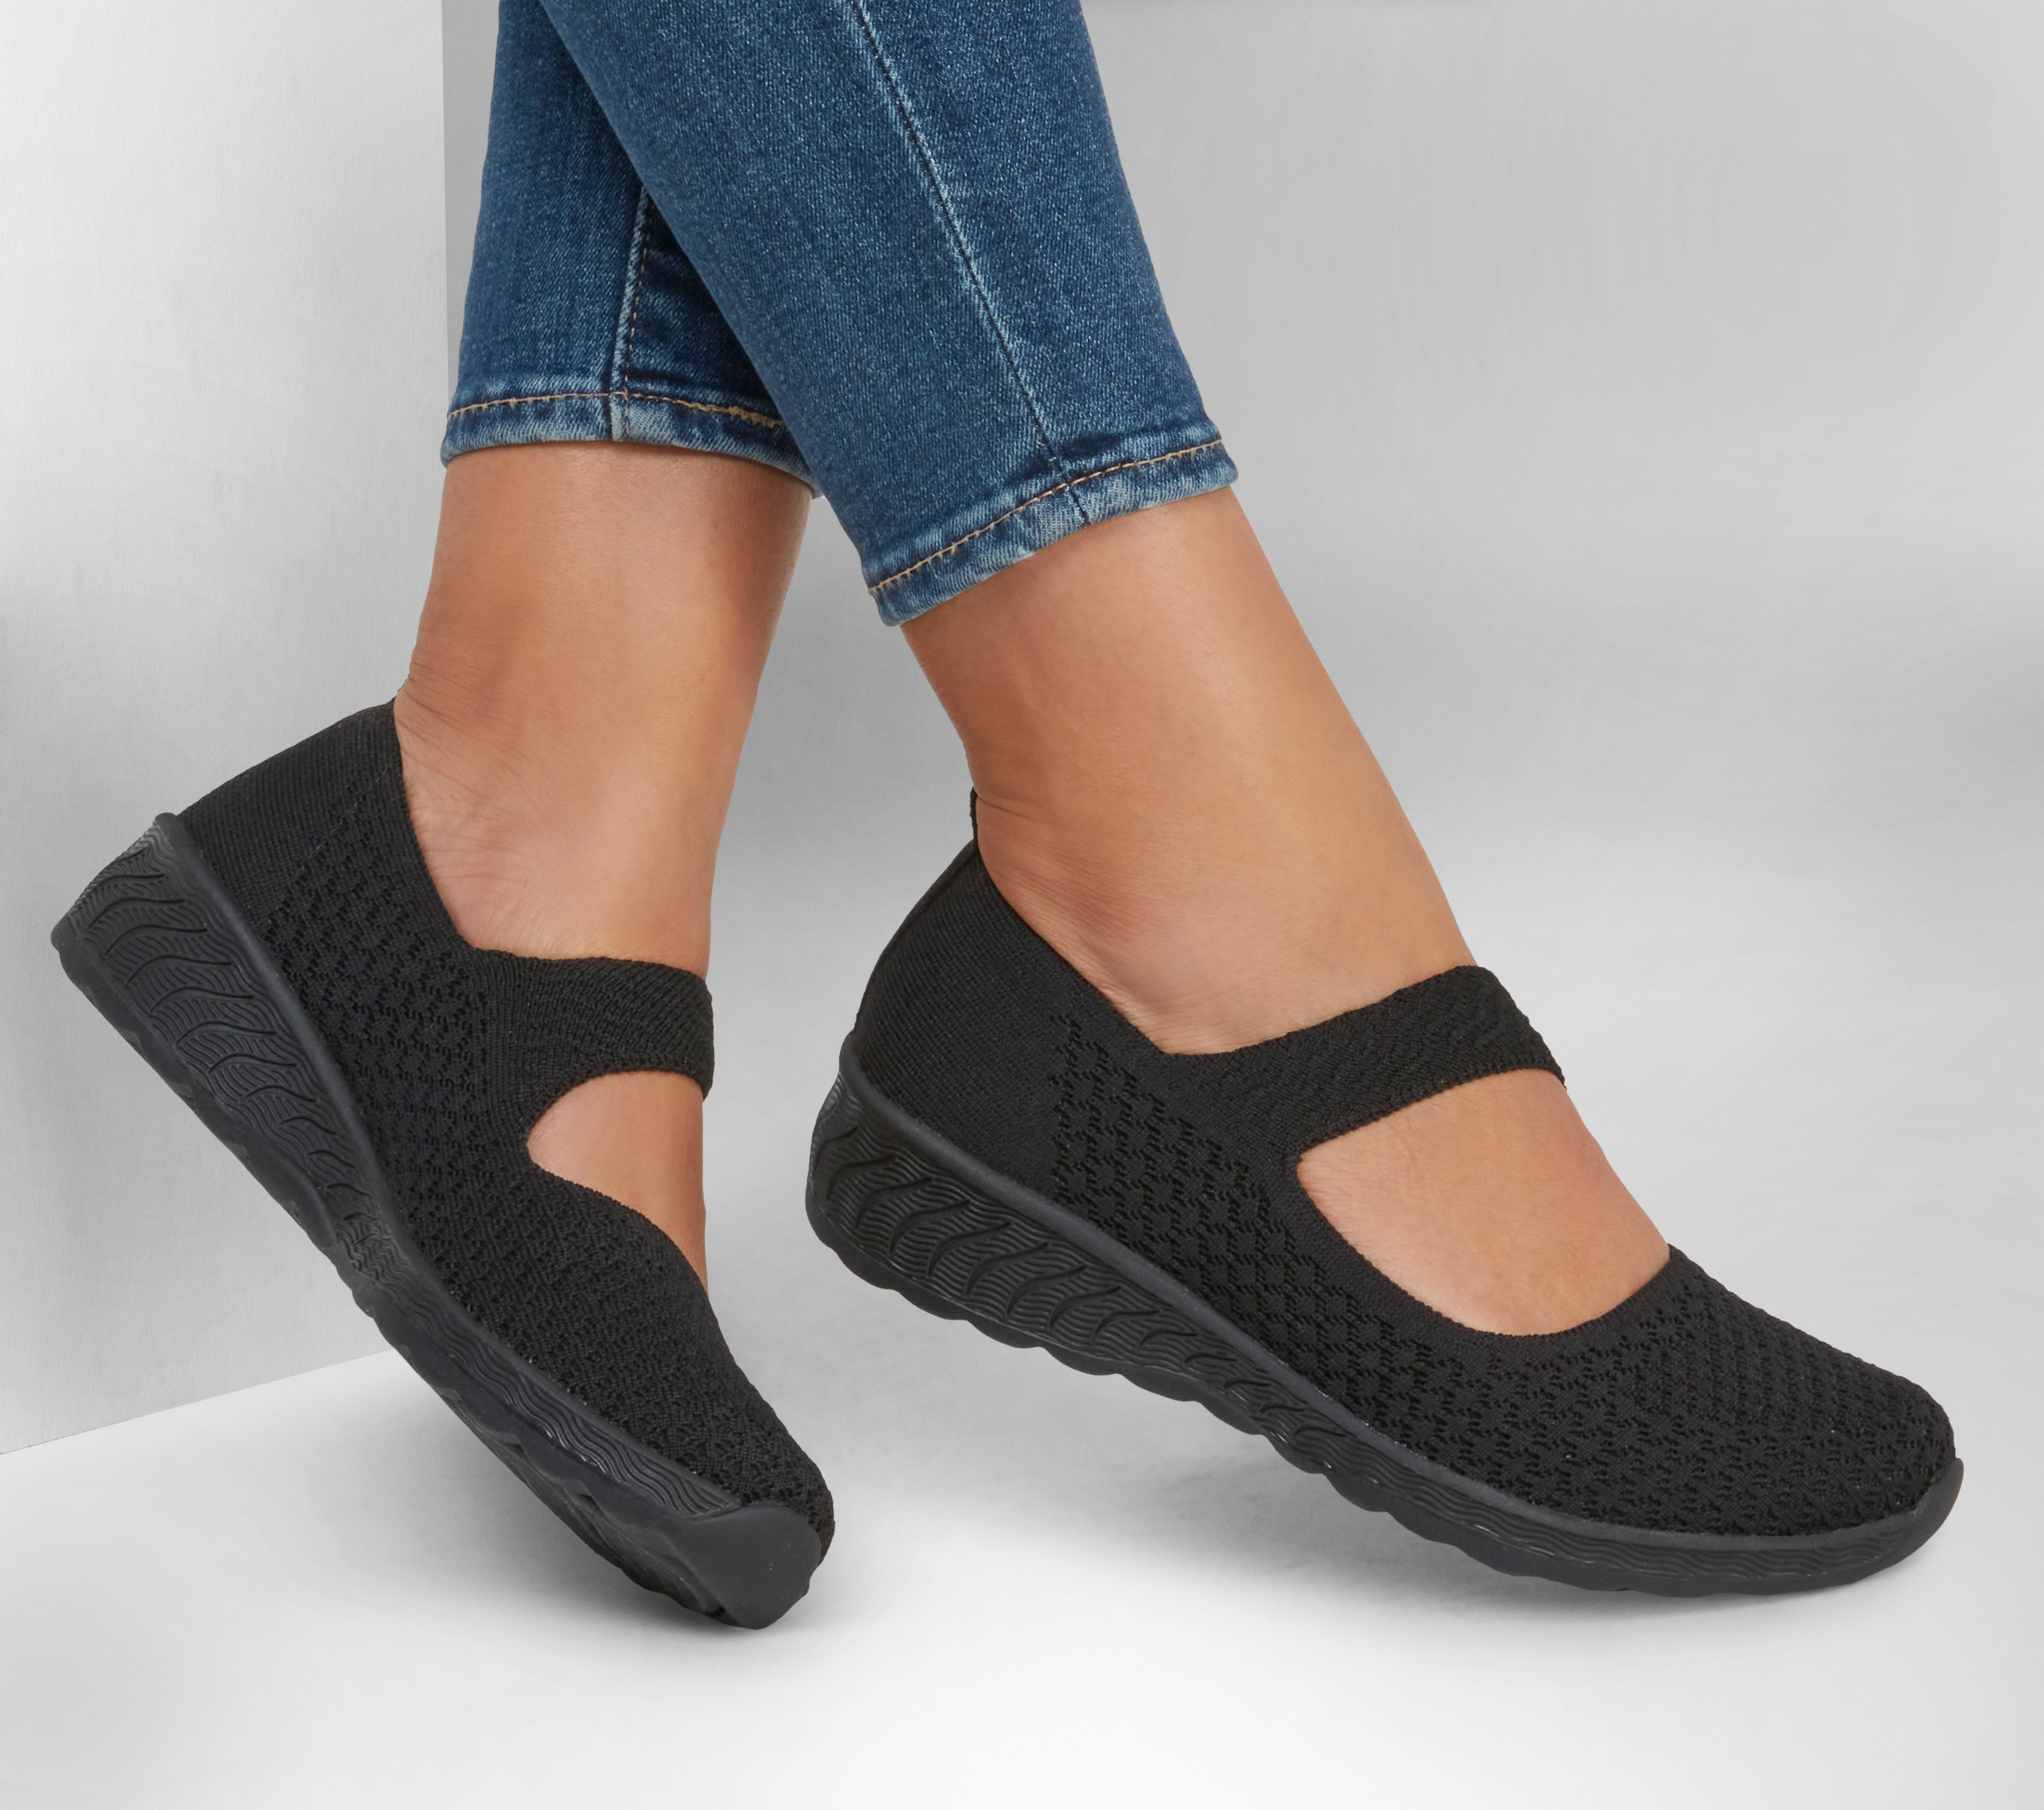 Relaxed Up-Lifted | SKECHERS